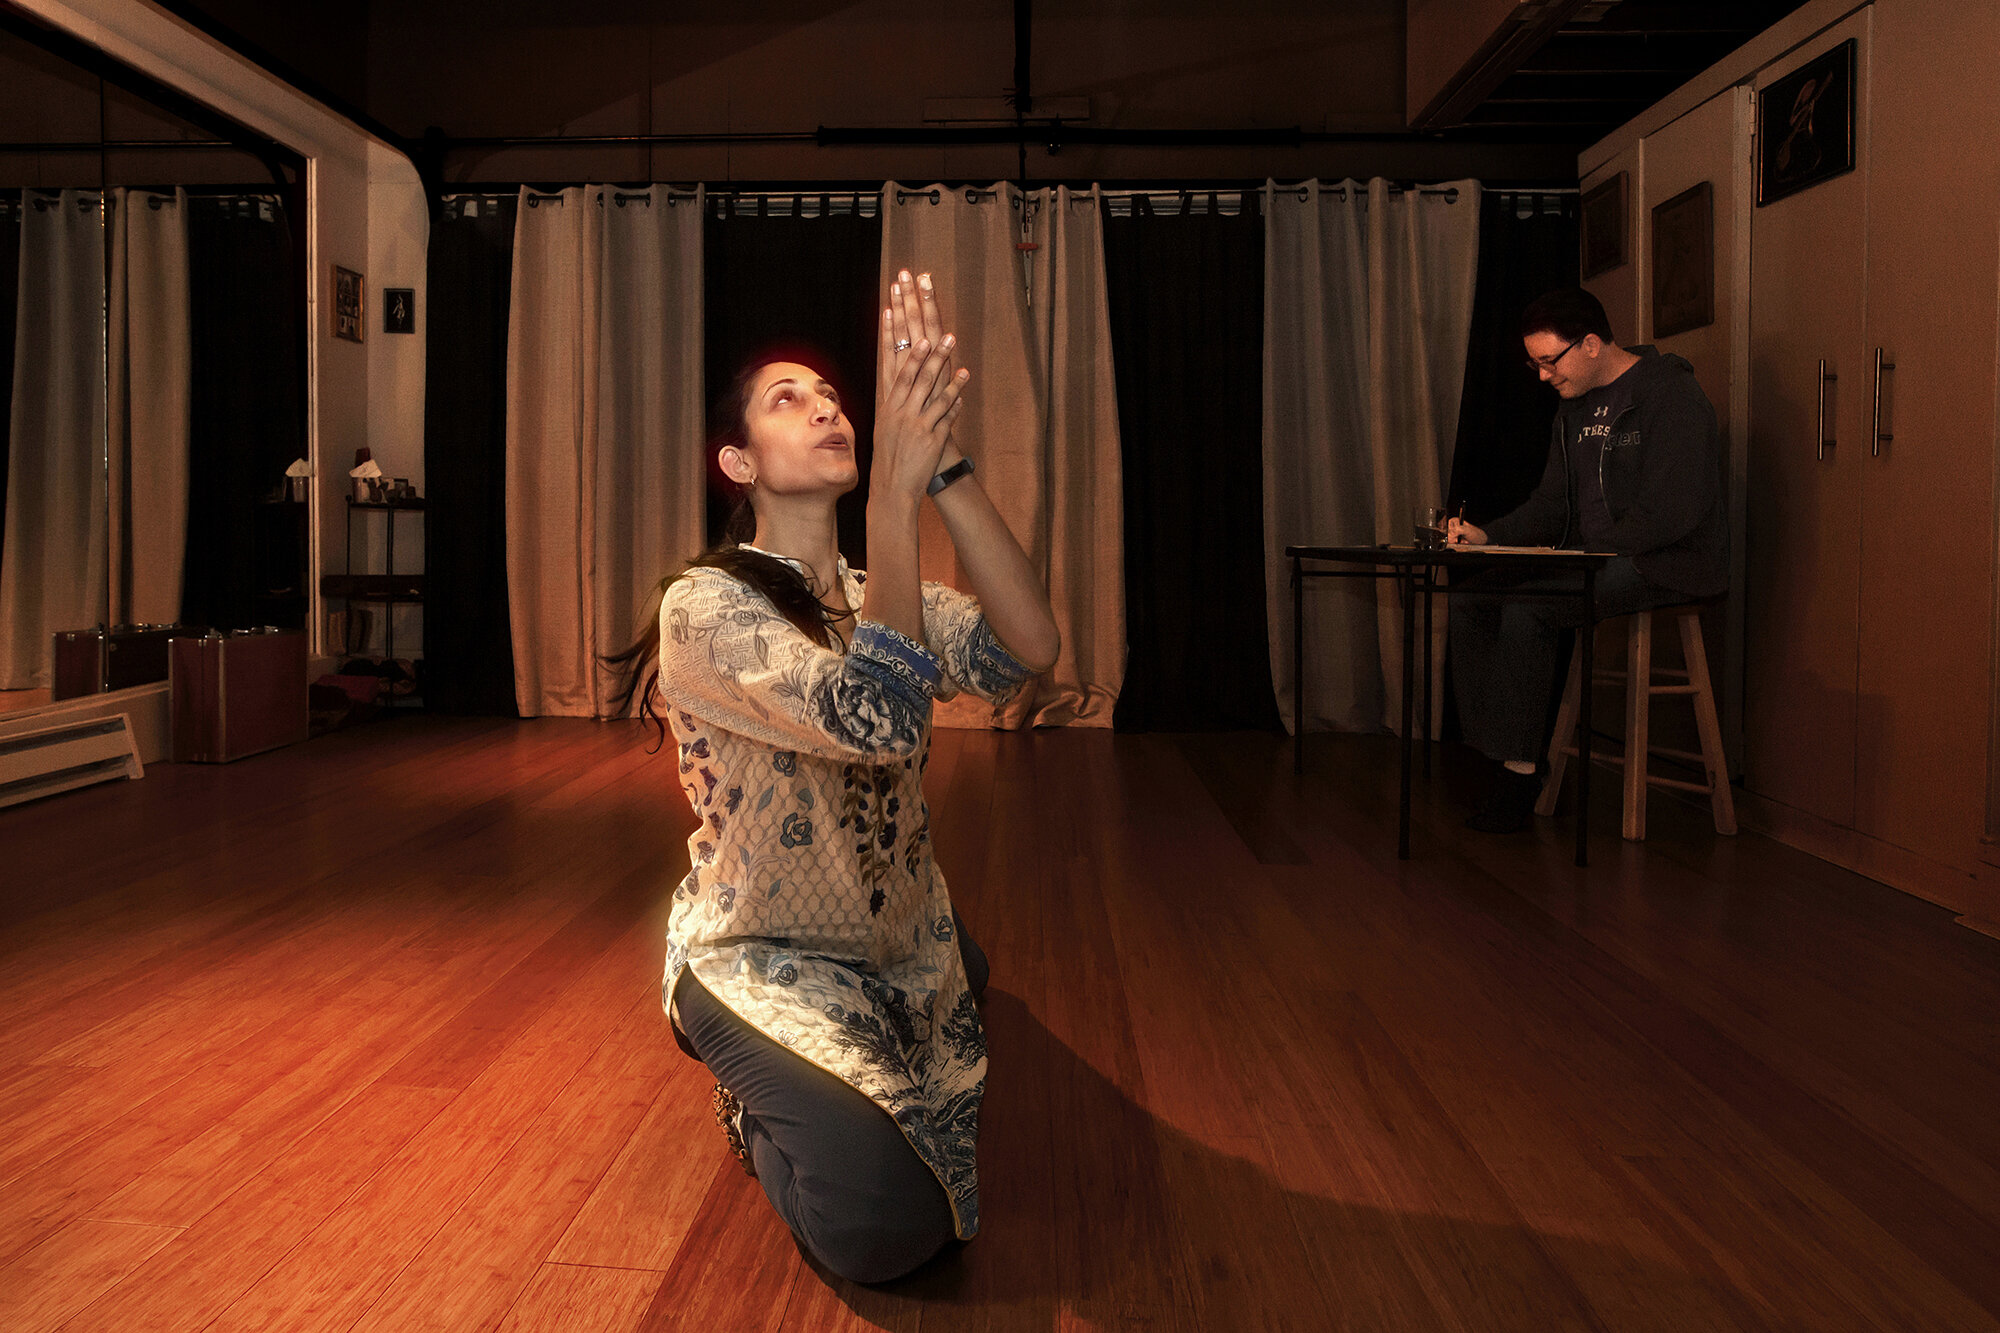   USA. Menlo Park, California. April, 2018. Farah Yasmeen Shaikh (left), a Kathak dancer, rehearses a dance drama in her studio as Dr. Mathew Spangler (right), the playwright and director of the drama, takes notes. Farah's dance drama, The Forgotten 